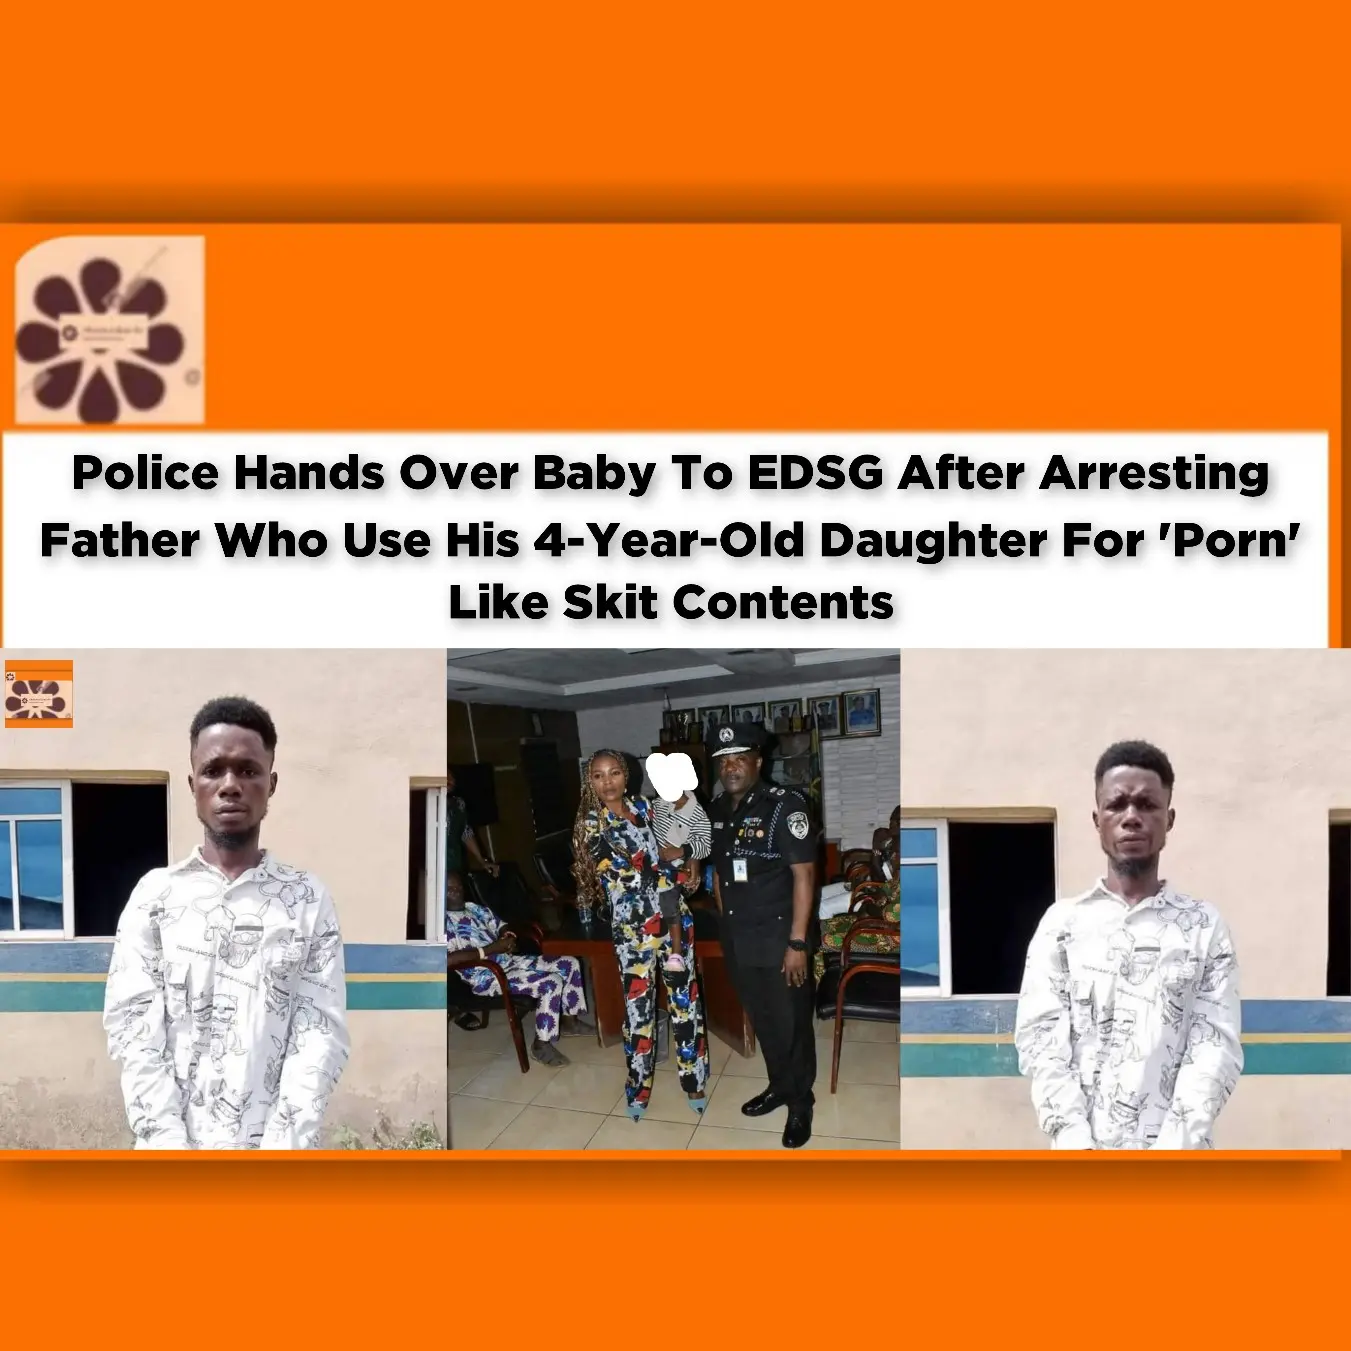 Police Hands Over Baby To EDSG After Arresting Father Who Use His 4-Year-Old Daughter For 'Porn' Like Skit Contents ~ OsazuwaAkonedo #Umahi